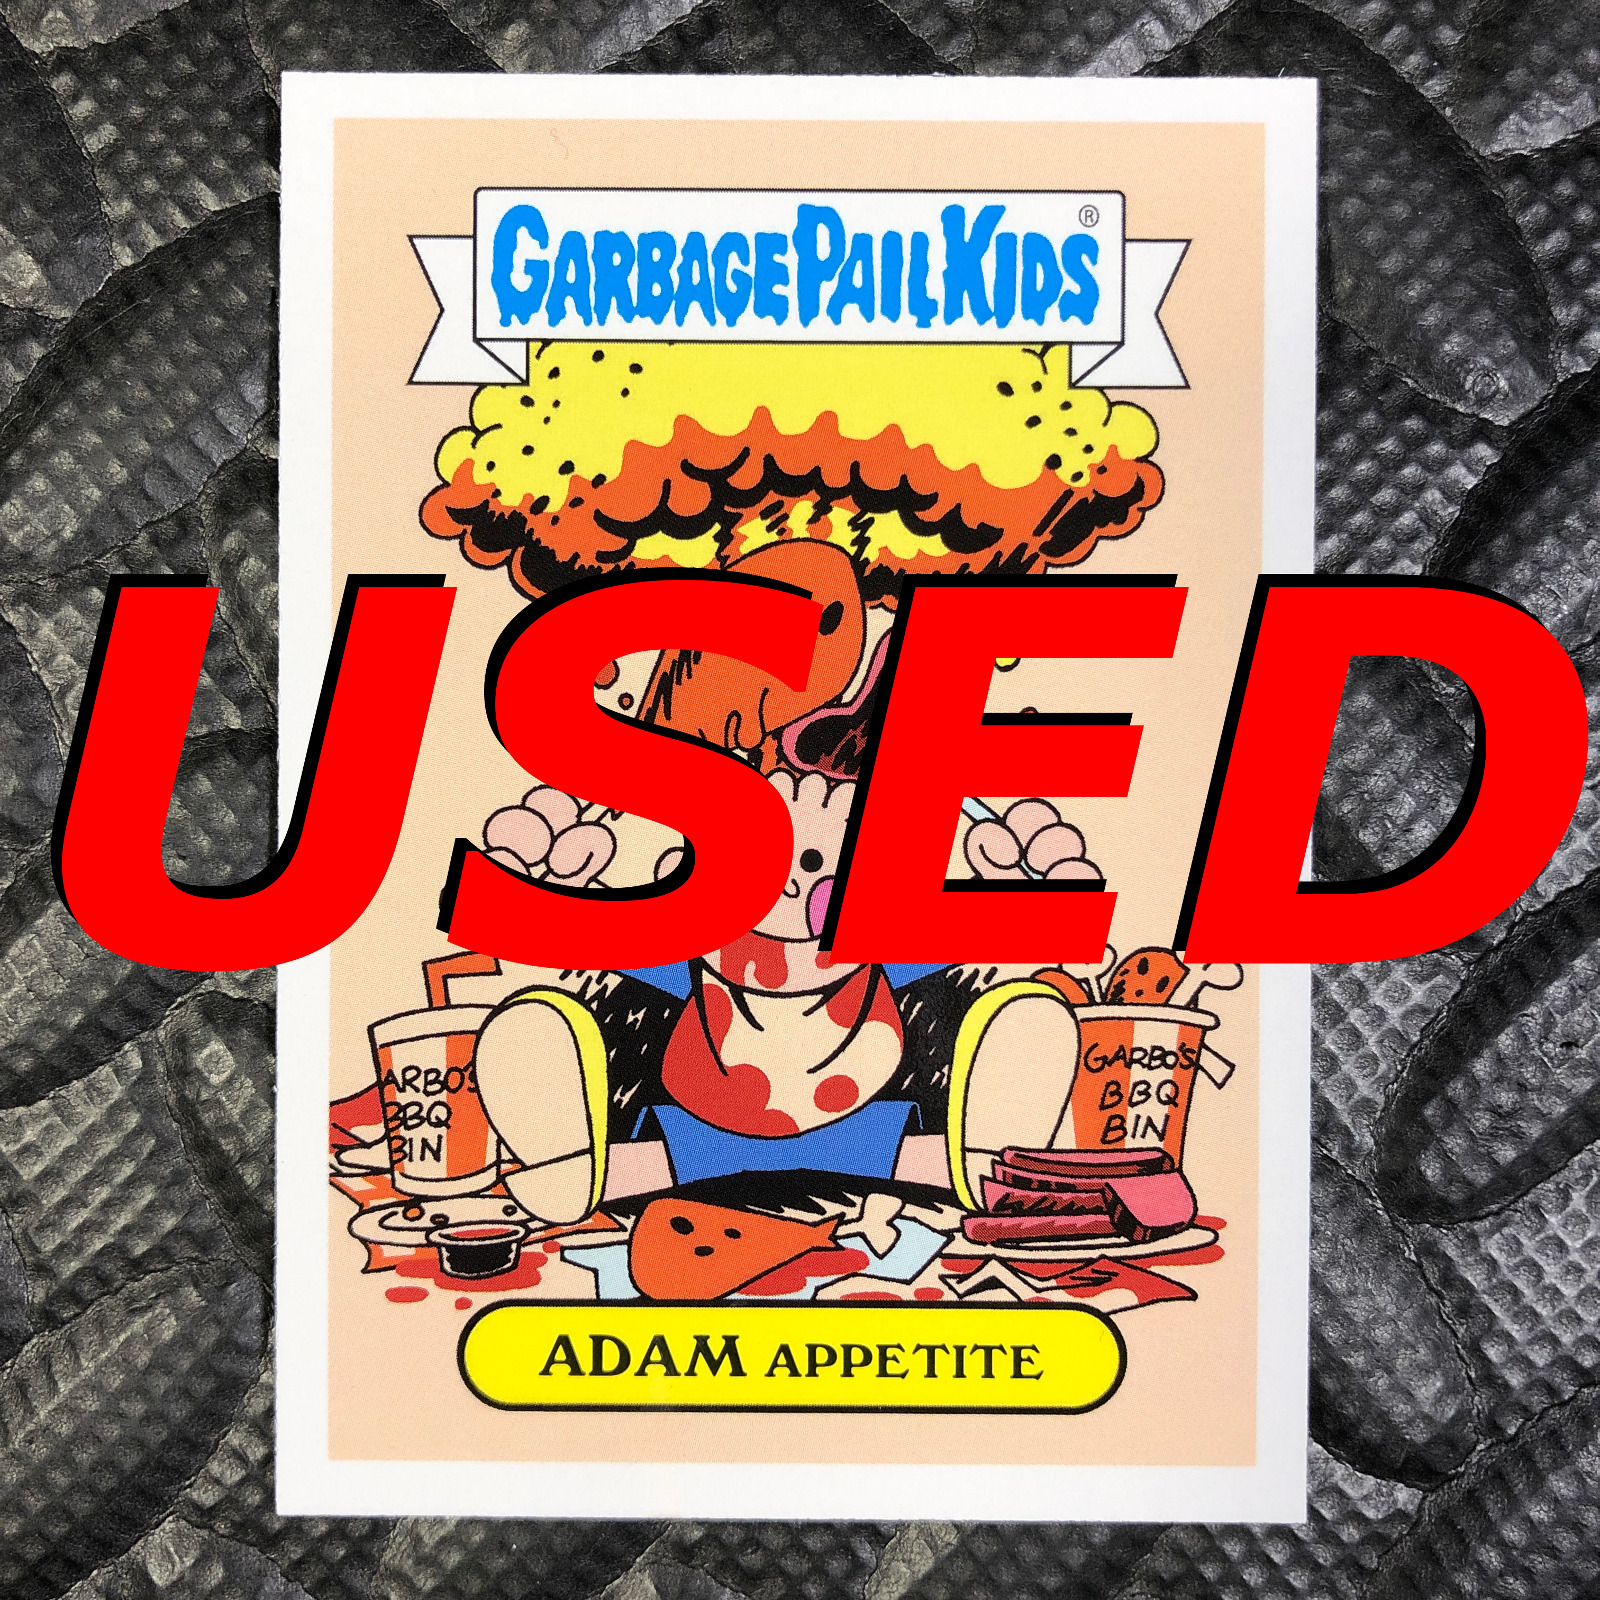 *USED NO REDEMPTION VALUE* GARBAGE PAIL KIDS FOOD FIGHT ADAM BOMB APPETITE CARD